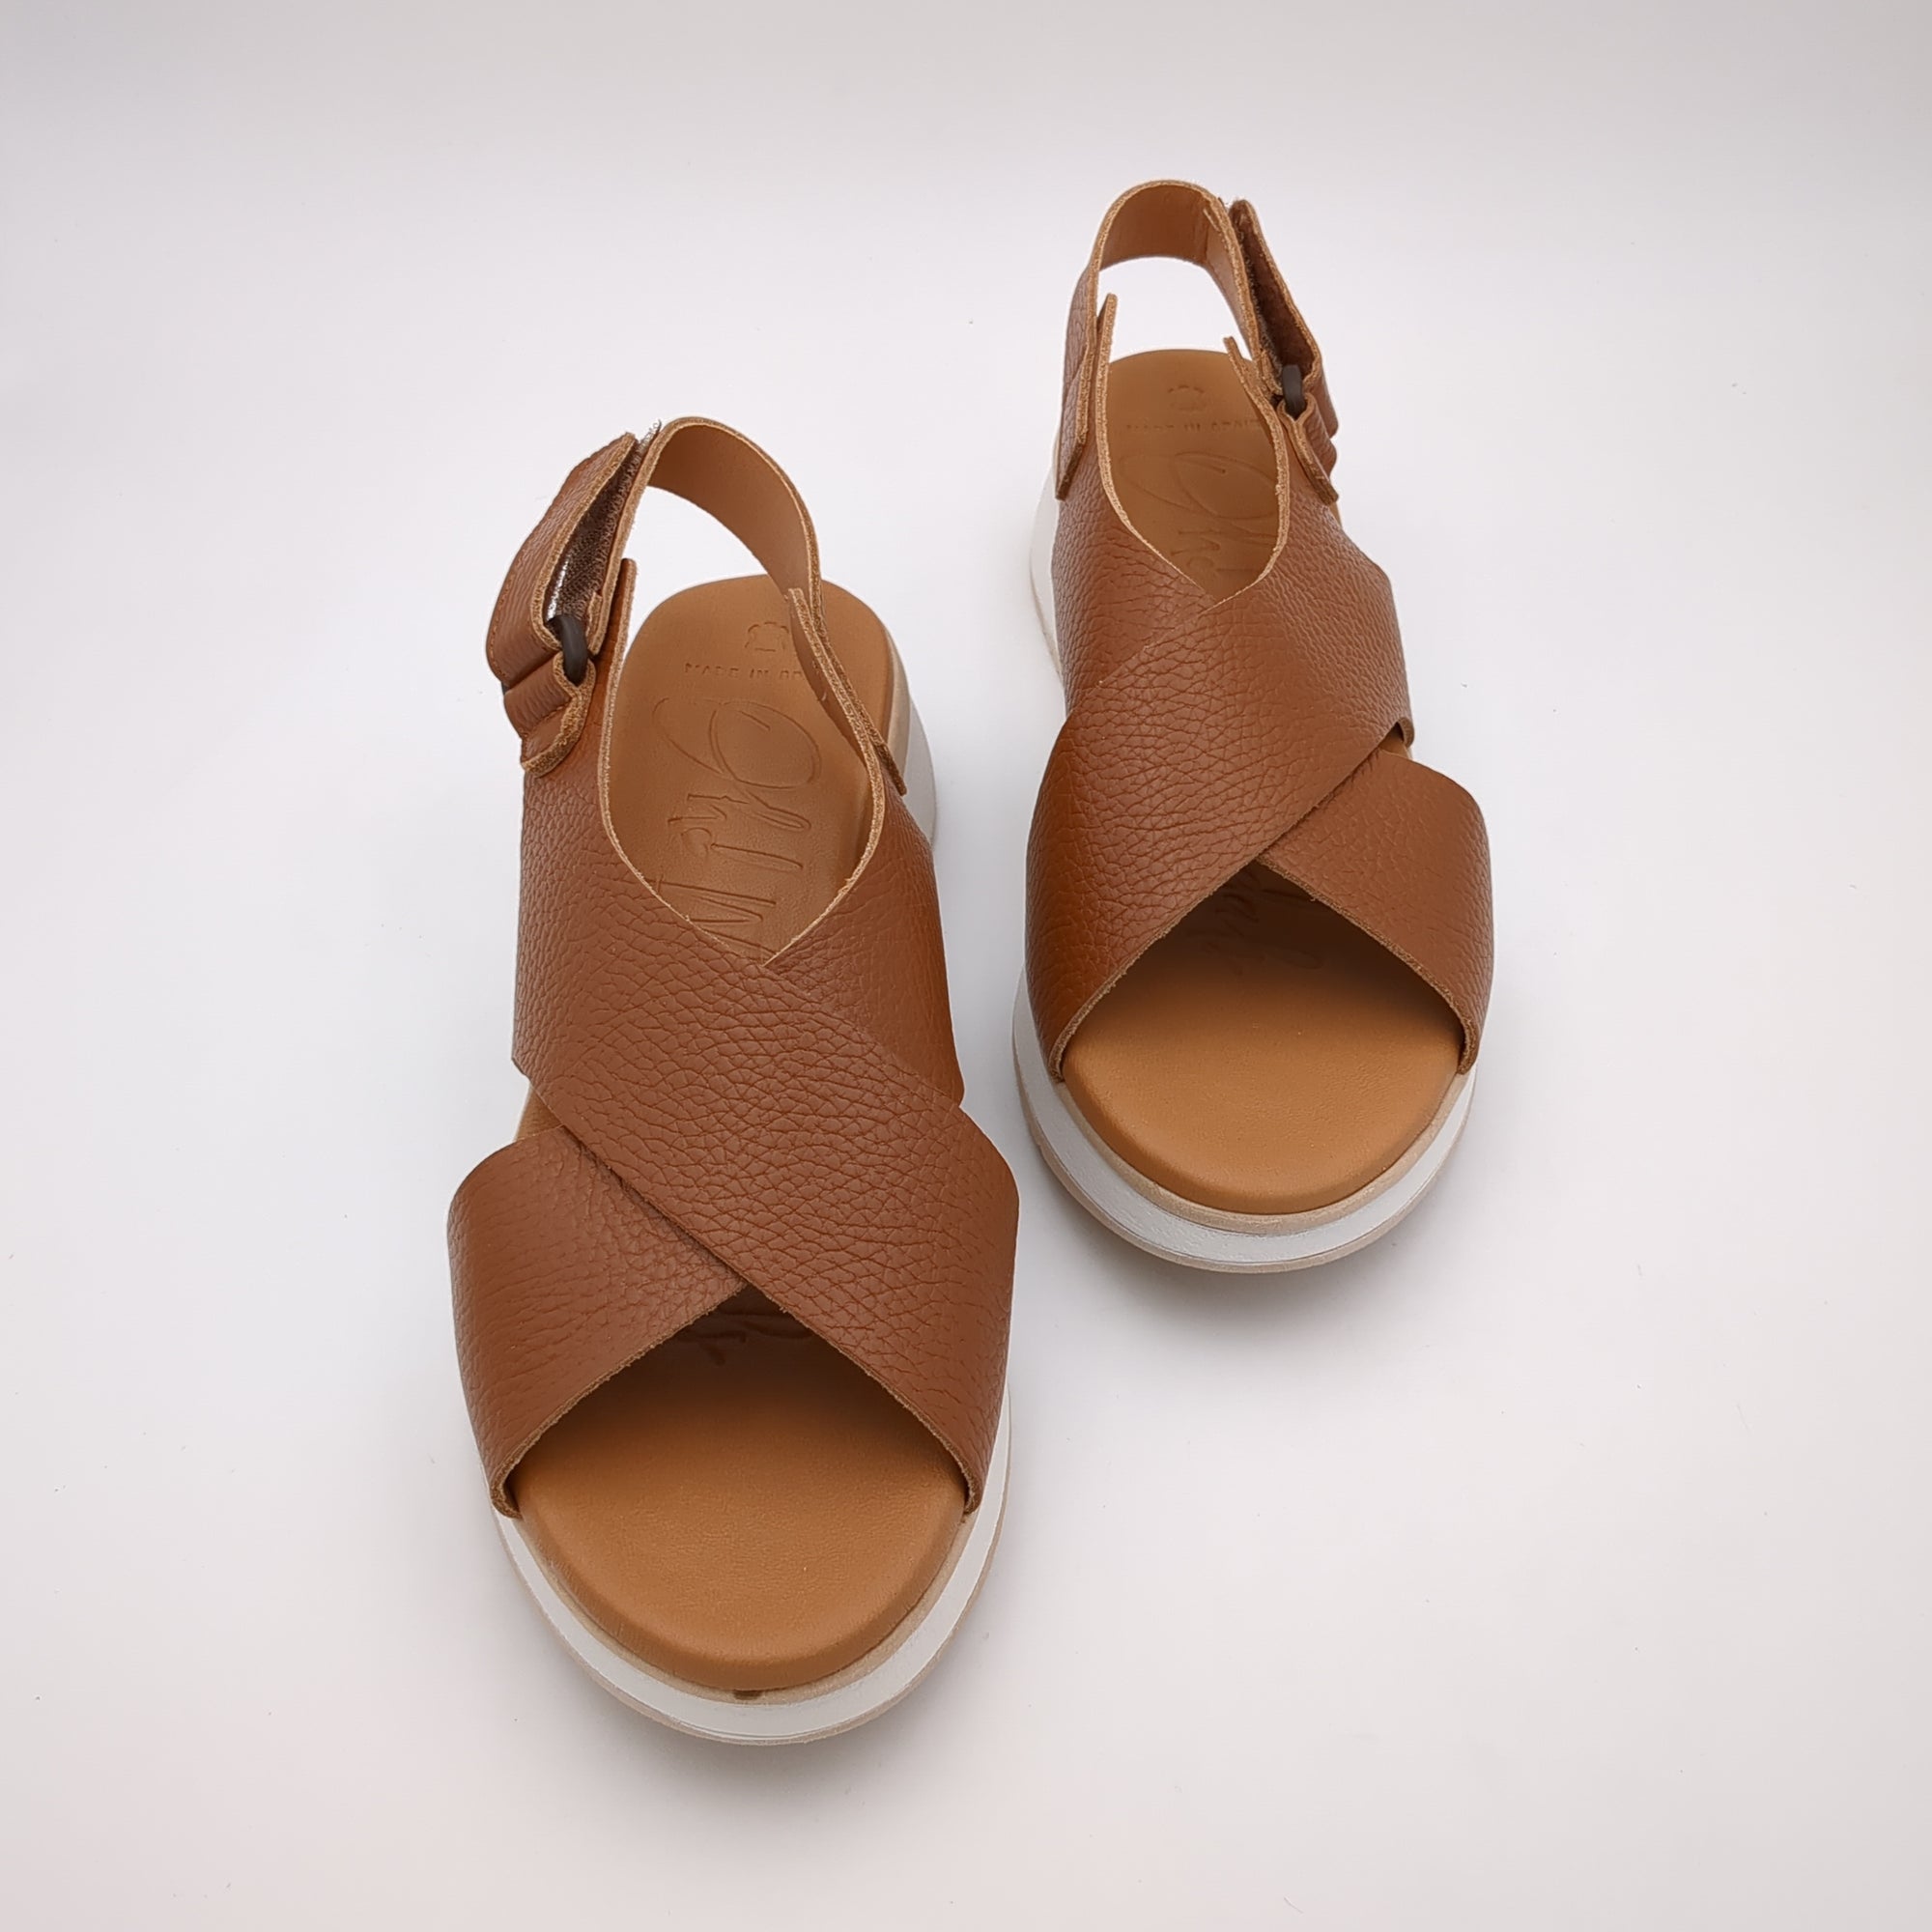 Front view of the Oh My Sandals 5412 DOYA ROBLE, highlighting the thick brown leather crossover straps.